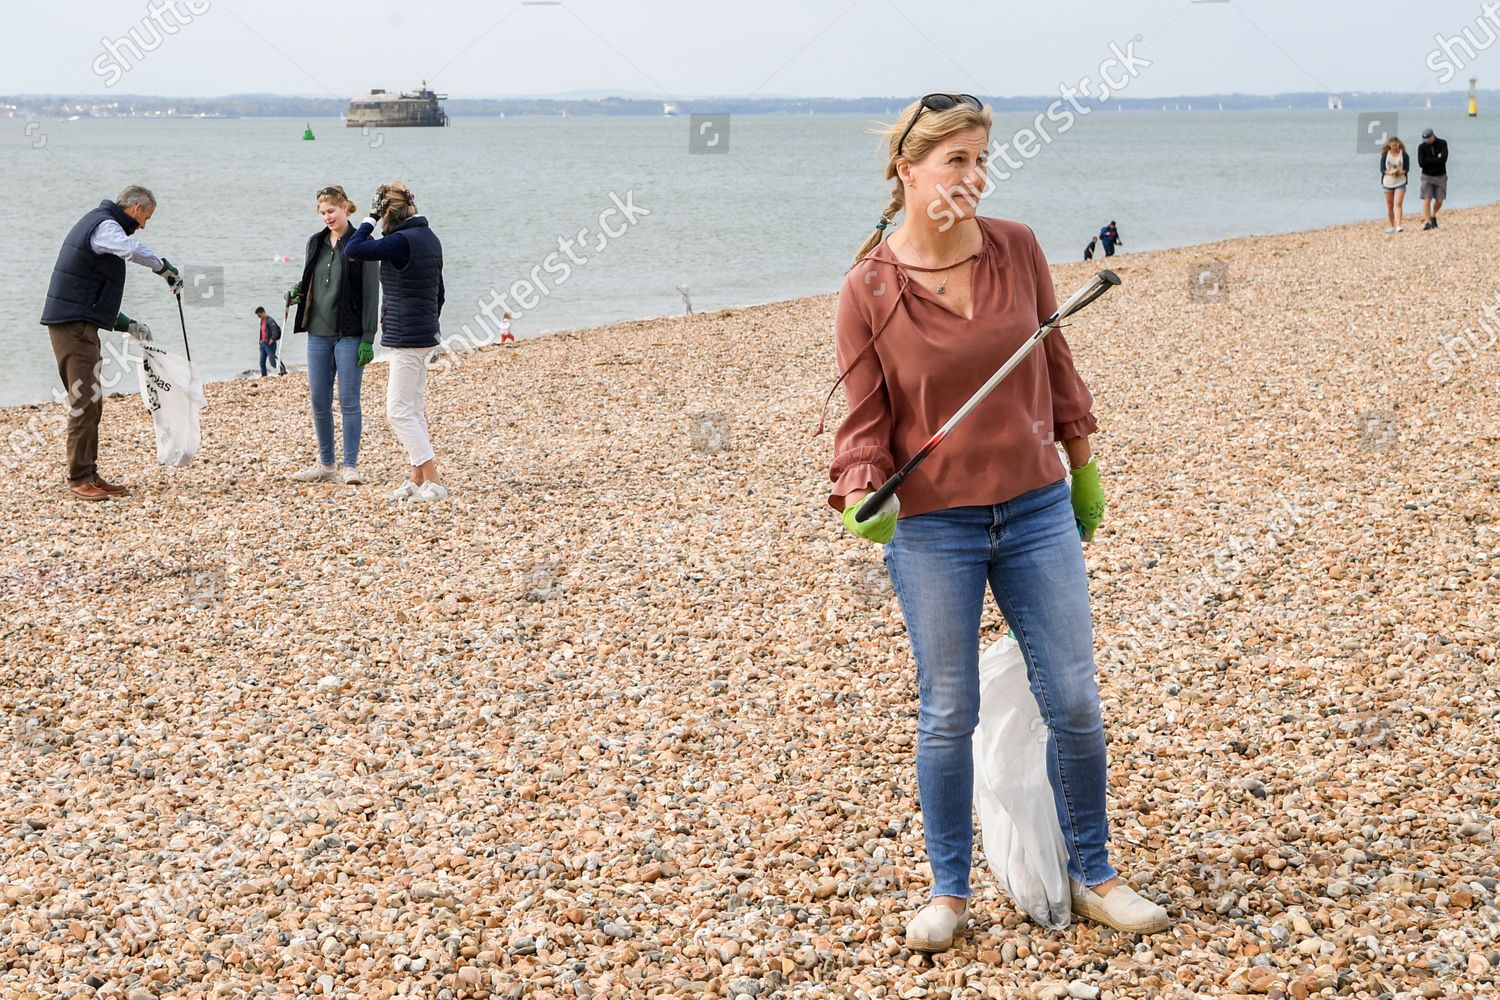 prince-edward-and-sophie-countess-of-wessex-great-british-beach-clean-southsea-beach-portsmouth-uk-shutterstock-editorial-10782998al.jpg